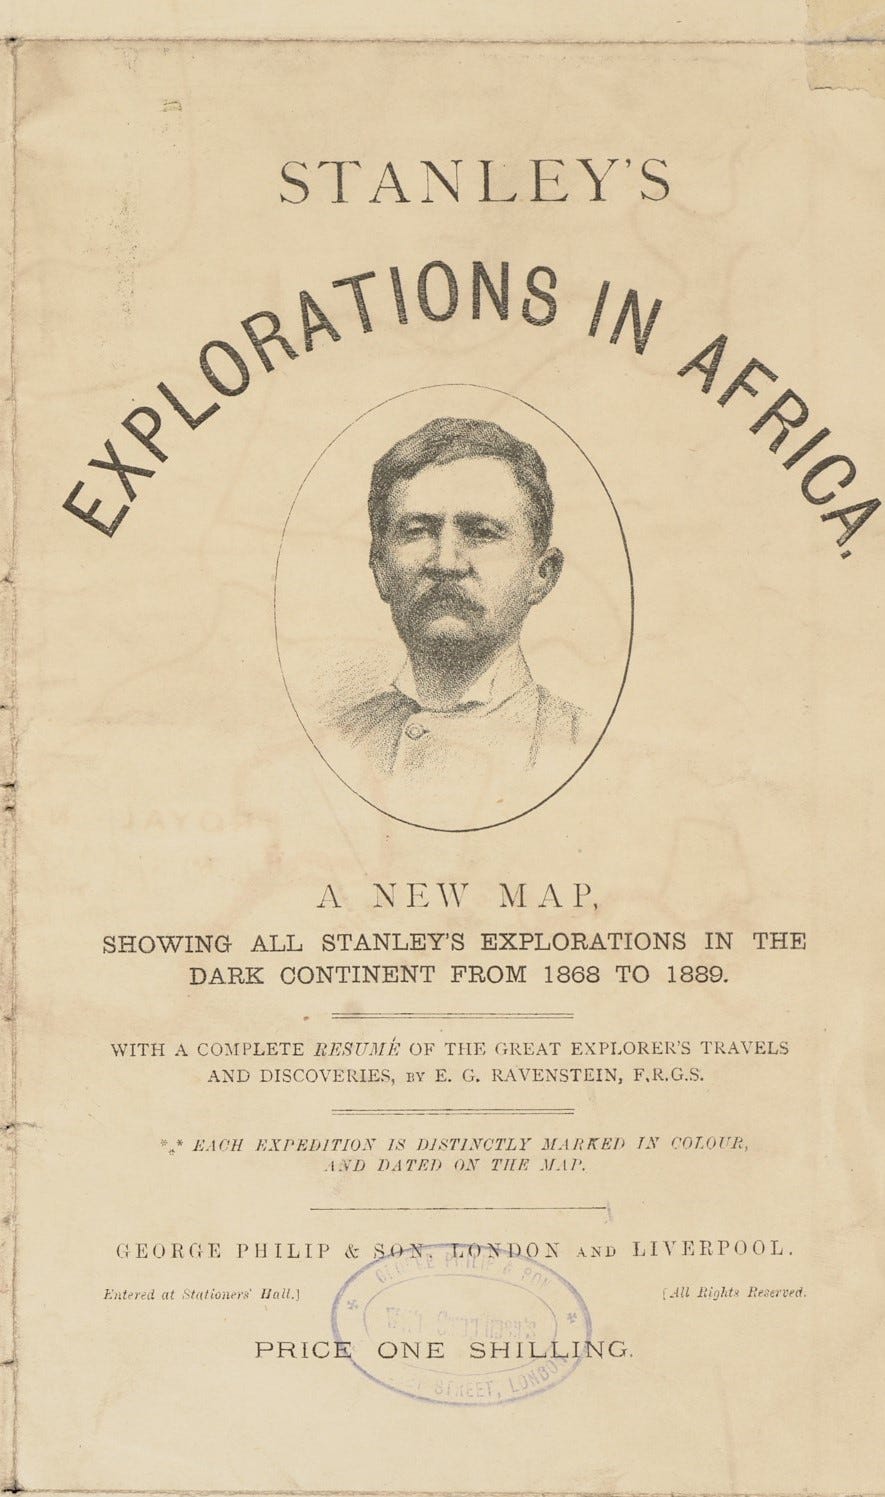 Cover of a folded map showing a portrait of explorer Henry Morton Stanley. Includes cost of one shilling.